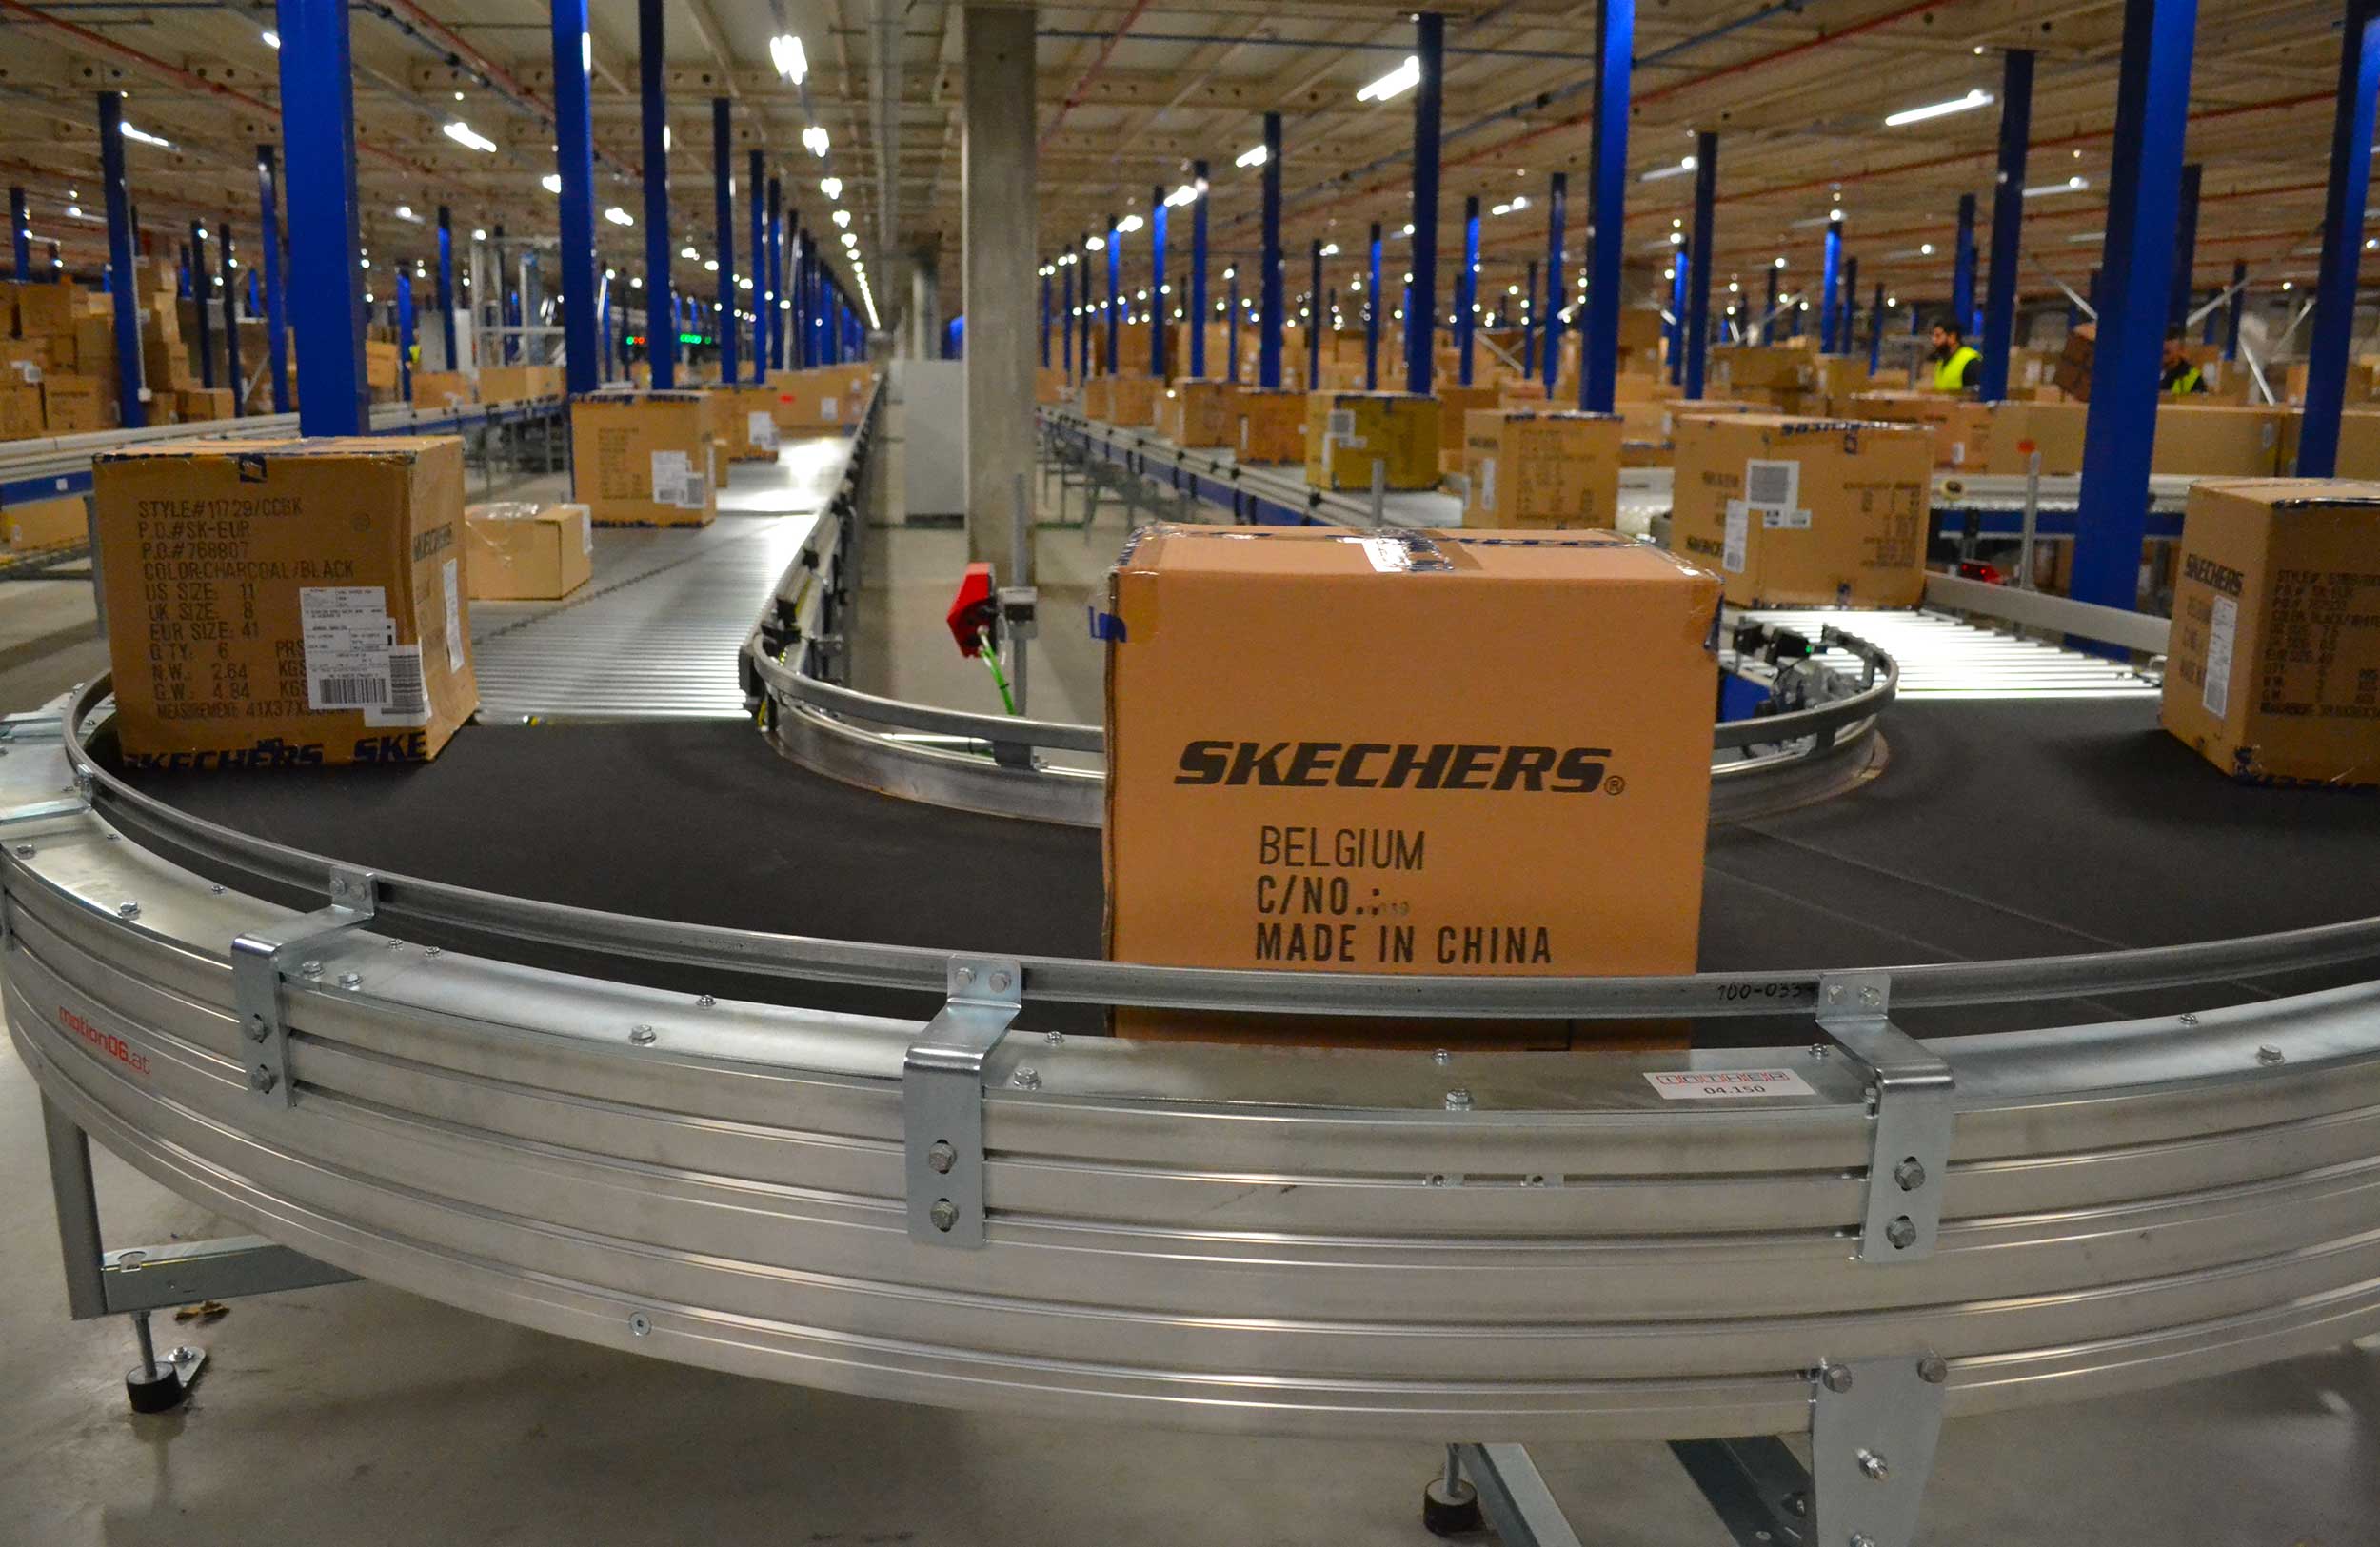 where are sketcher shoes manufactured